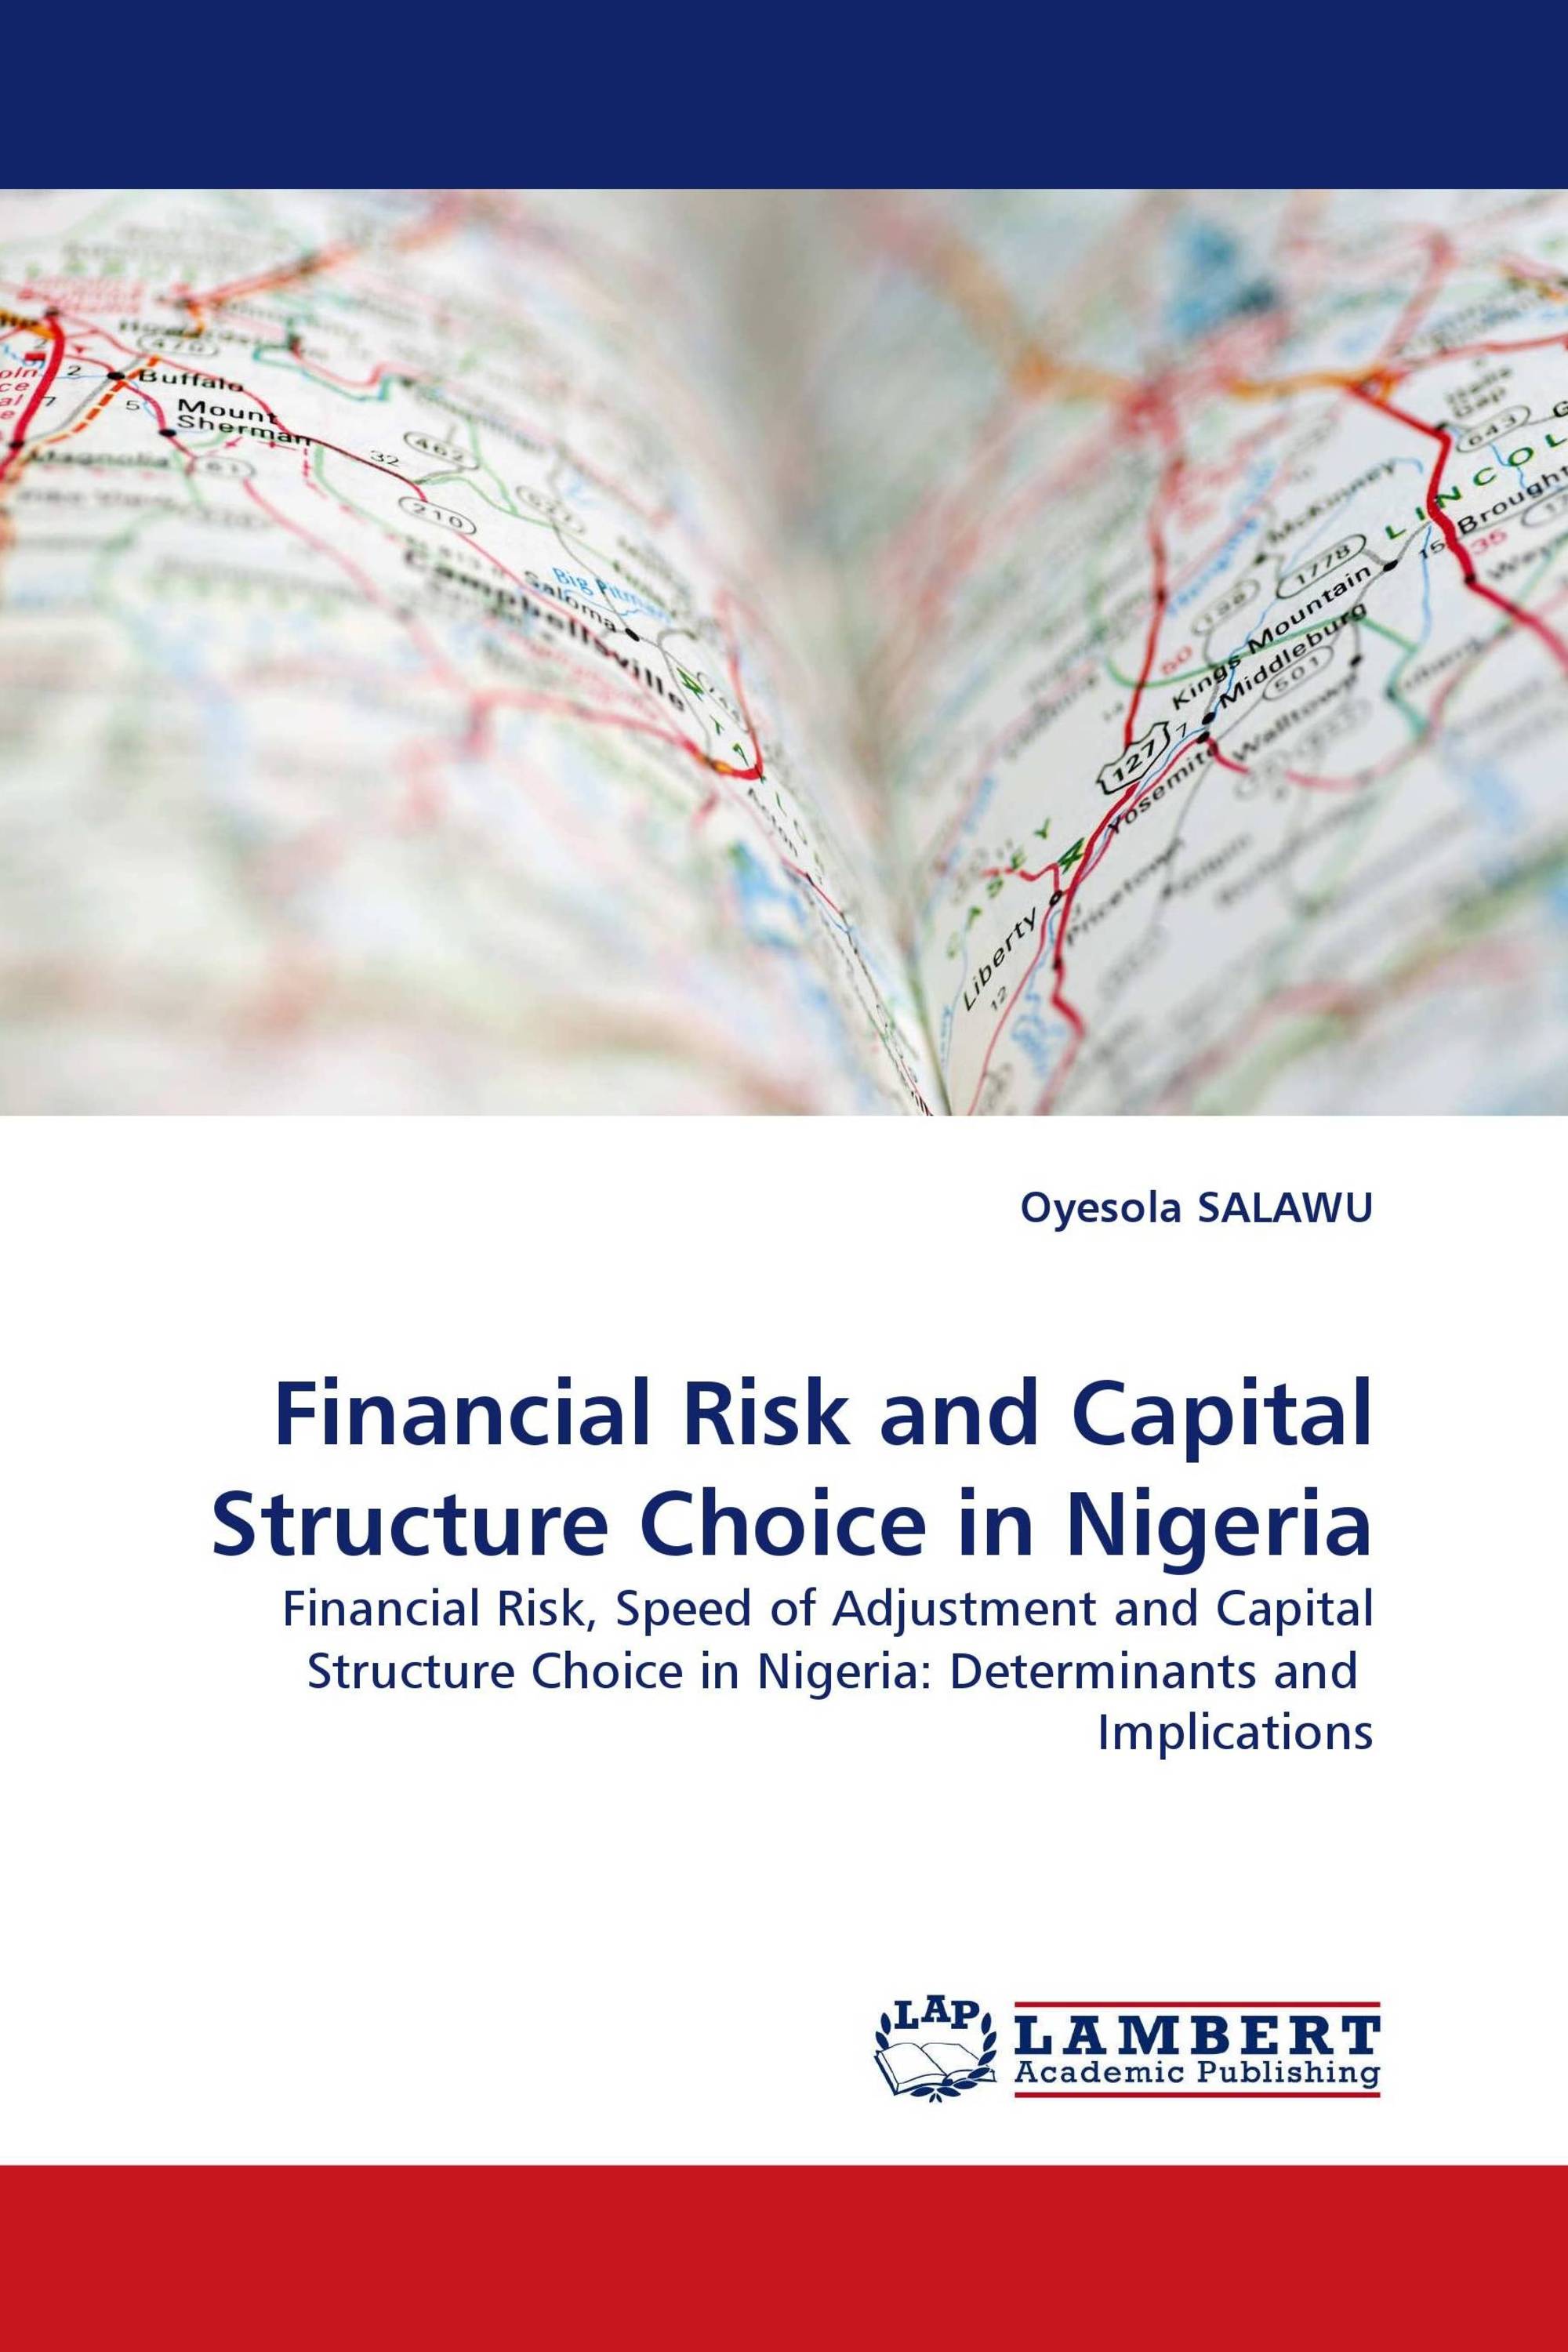 Financial Risk and Capital Structure Choice in Nigeria